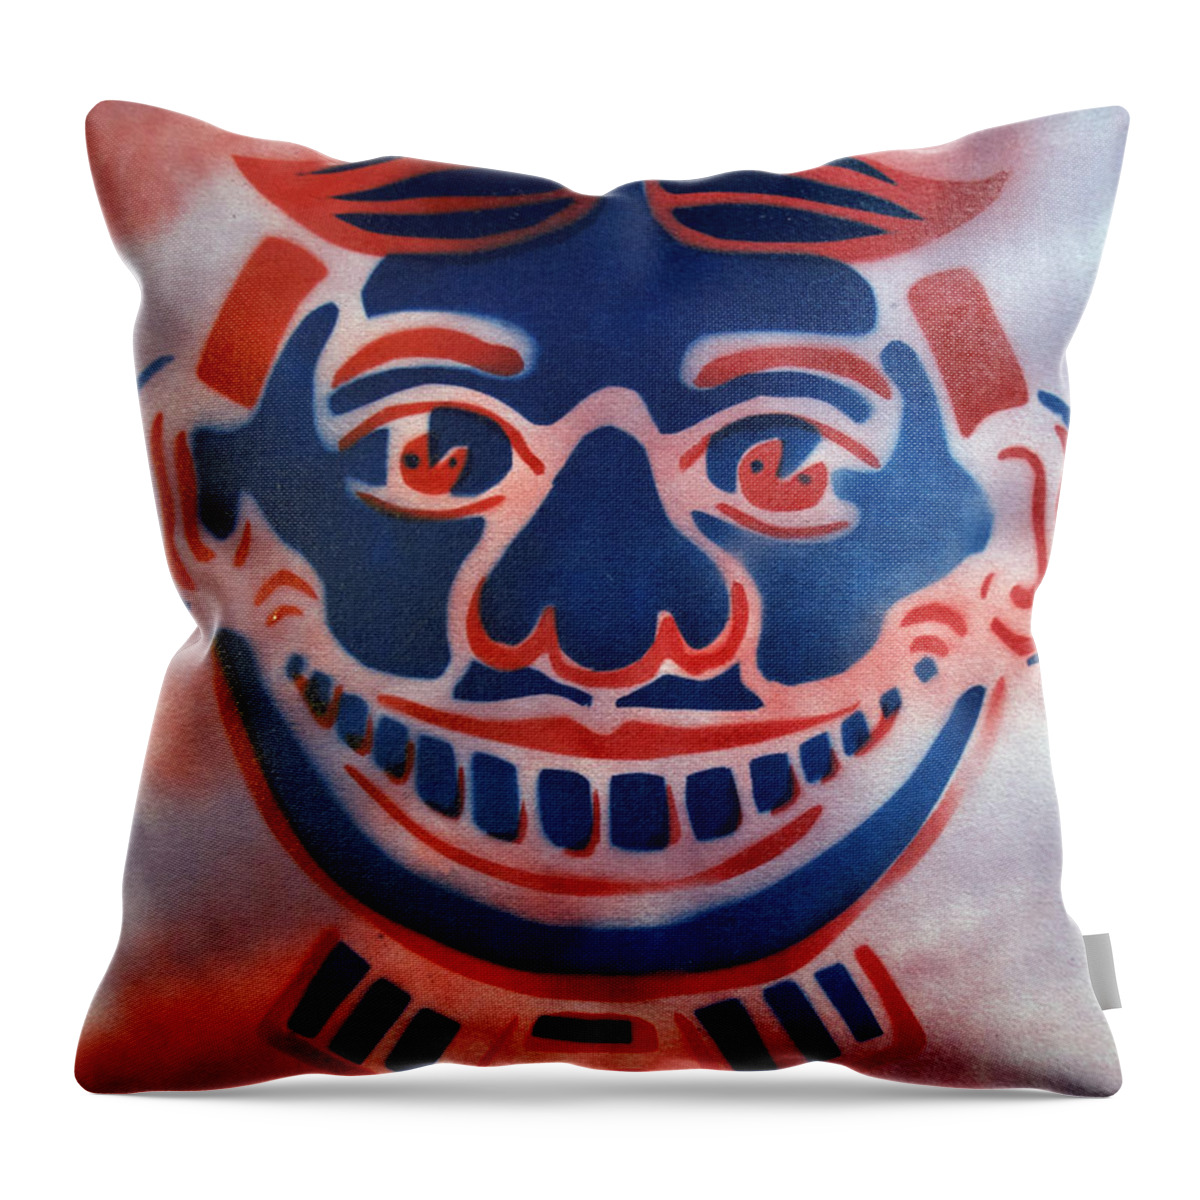 Tillie Of Asbury Park Throw Pillow featuring the painting Blue and Red Tillie by Patricia Arroyo